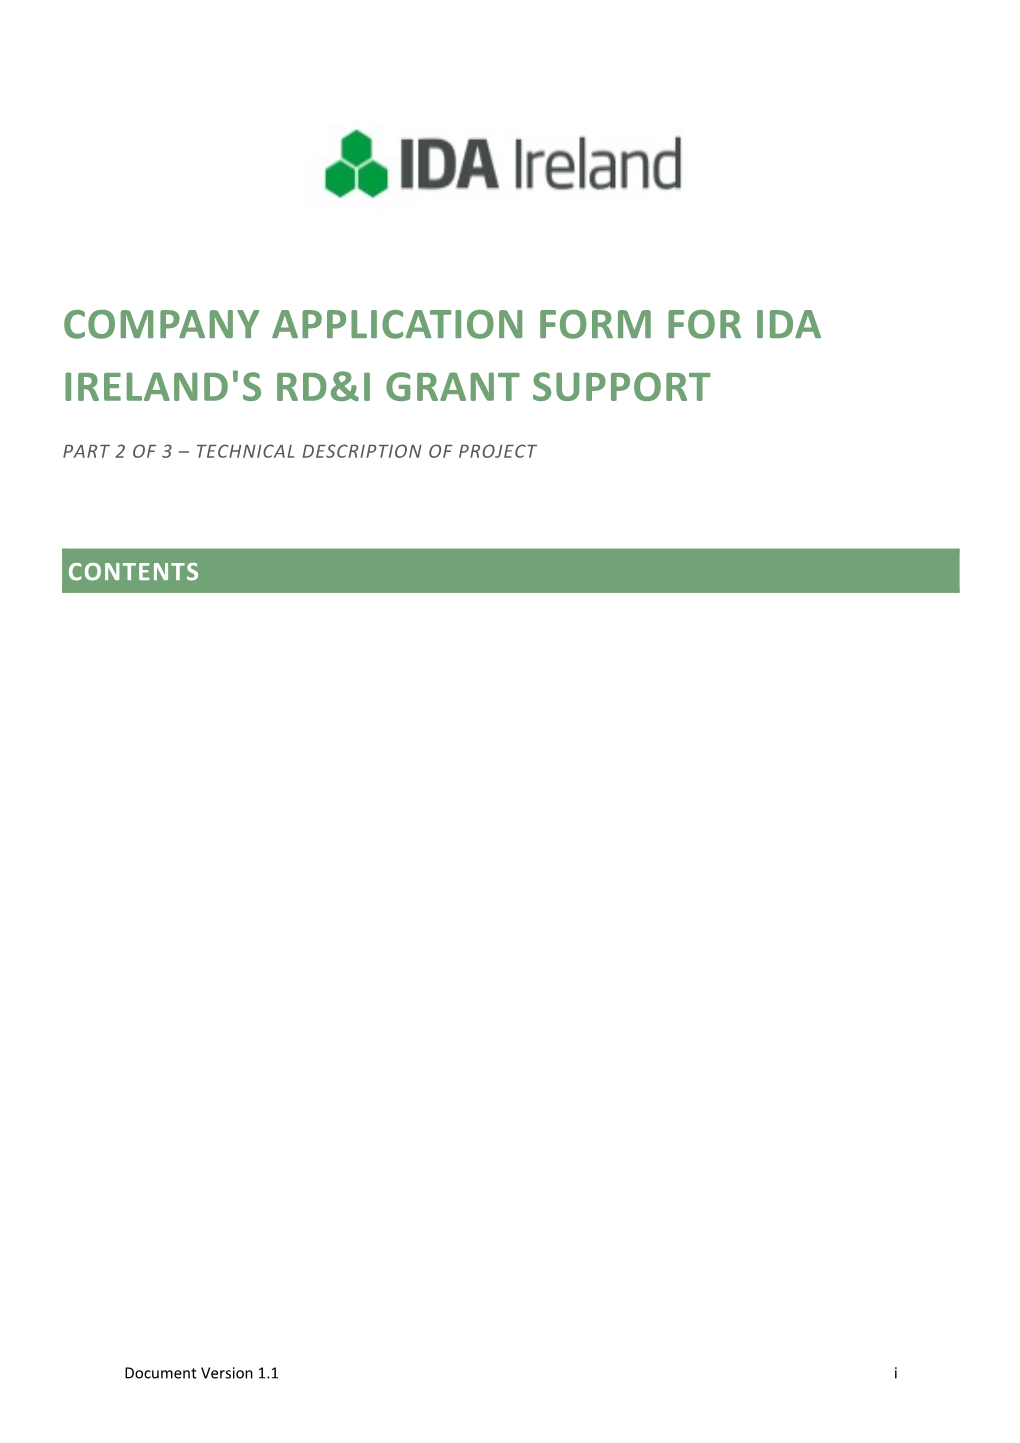 Company Application Form for IDA Ireland's RD&I Grant Support